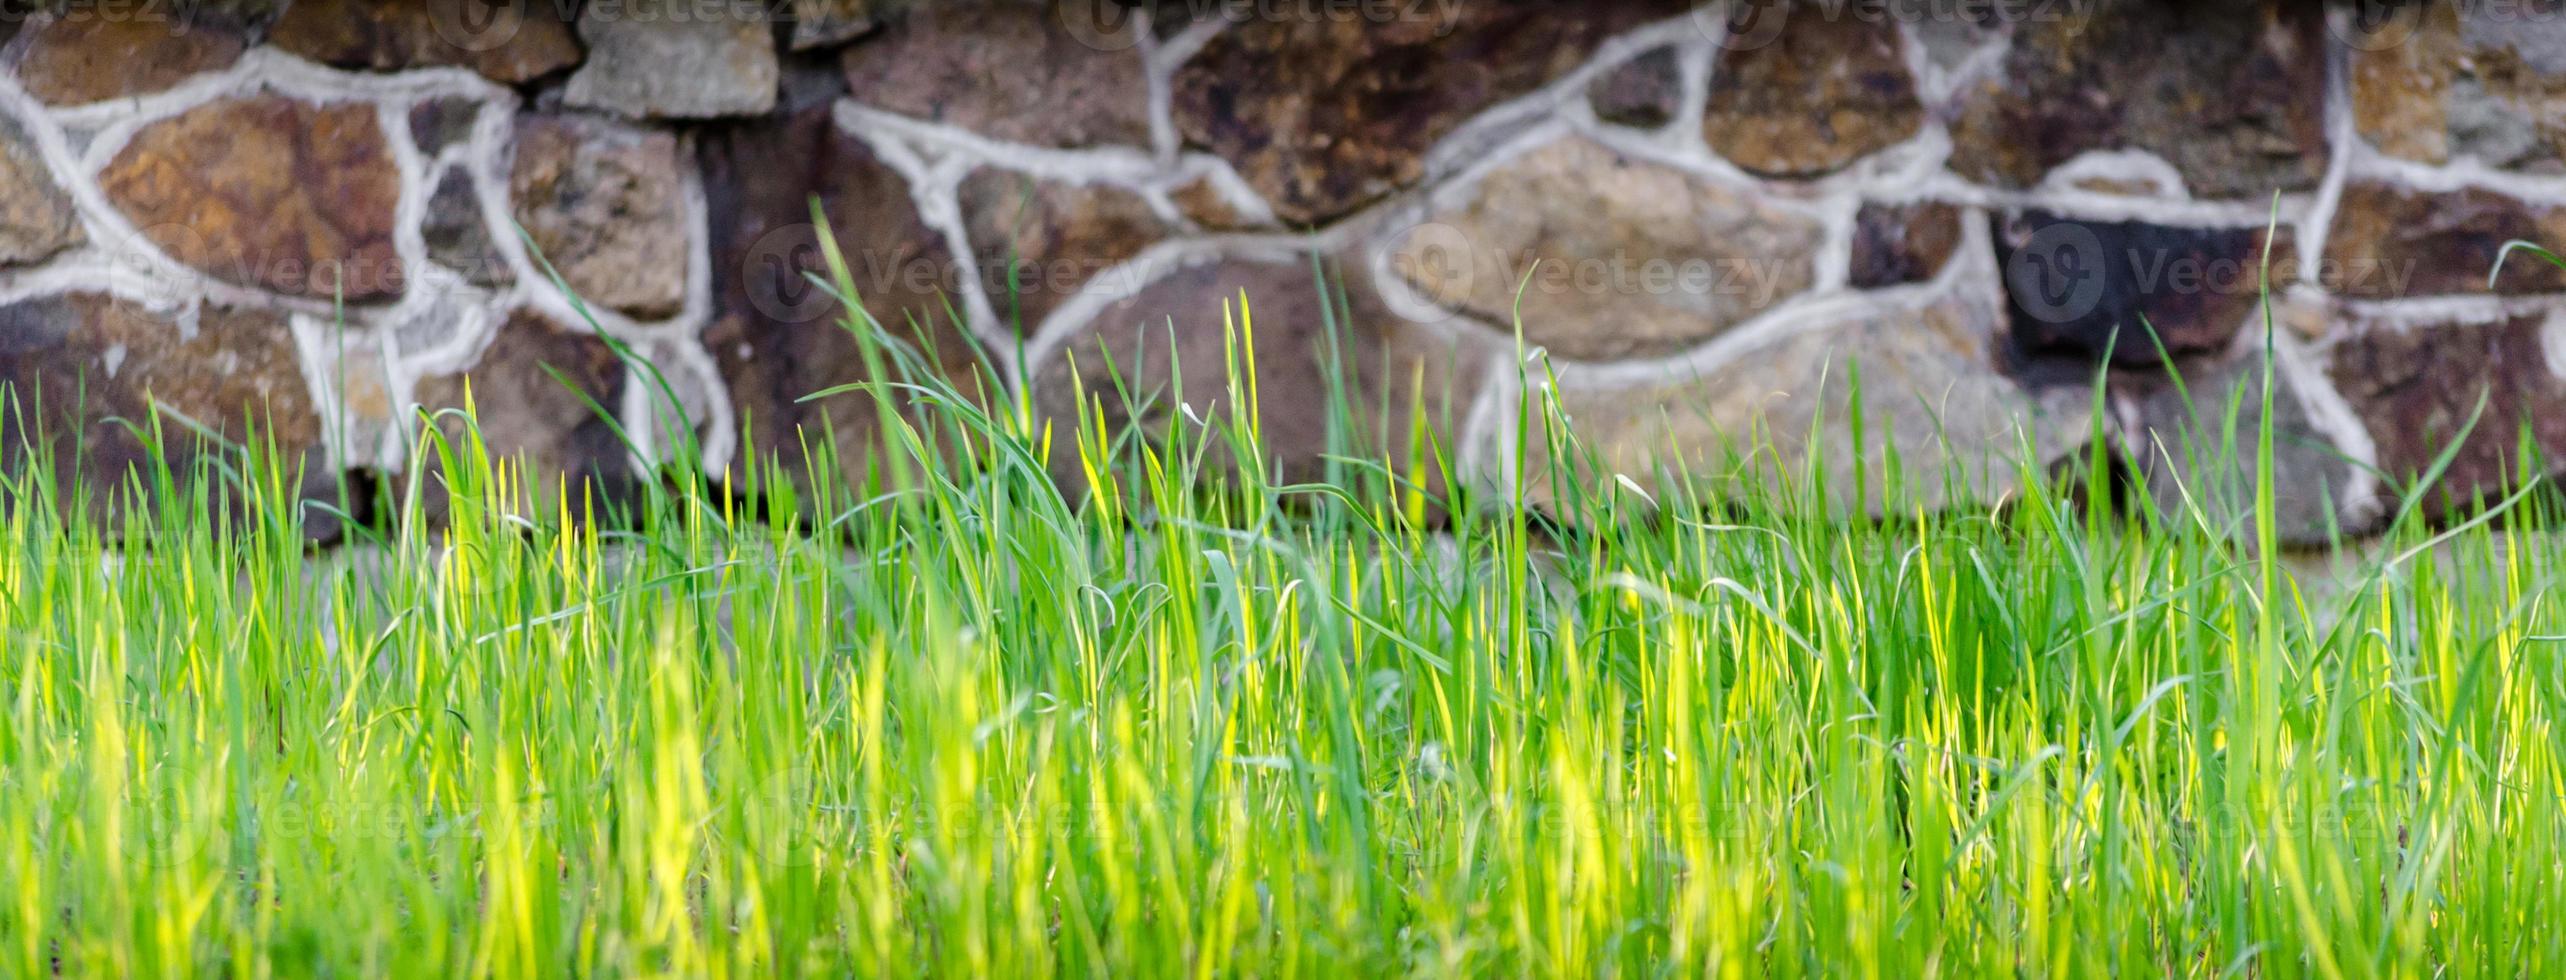 fresh green grass on stone wall background close up photo